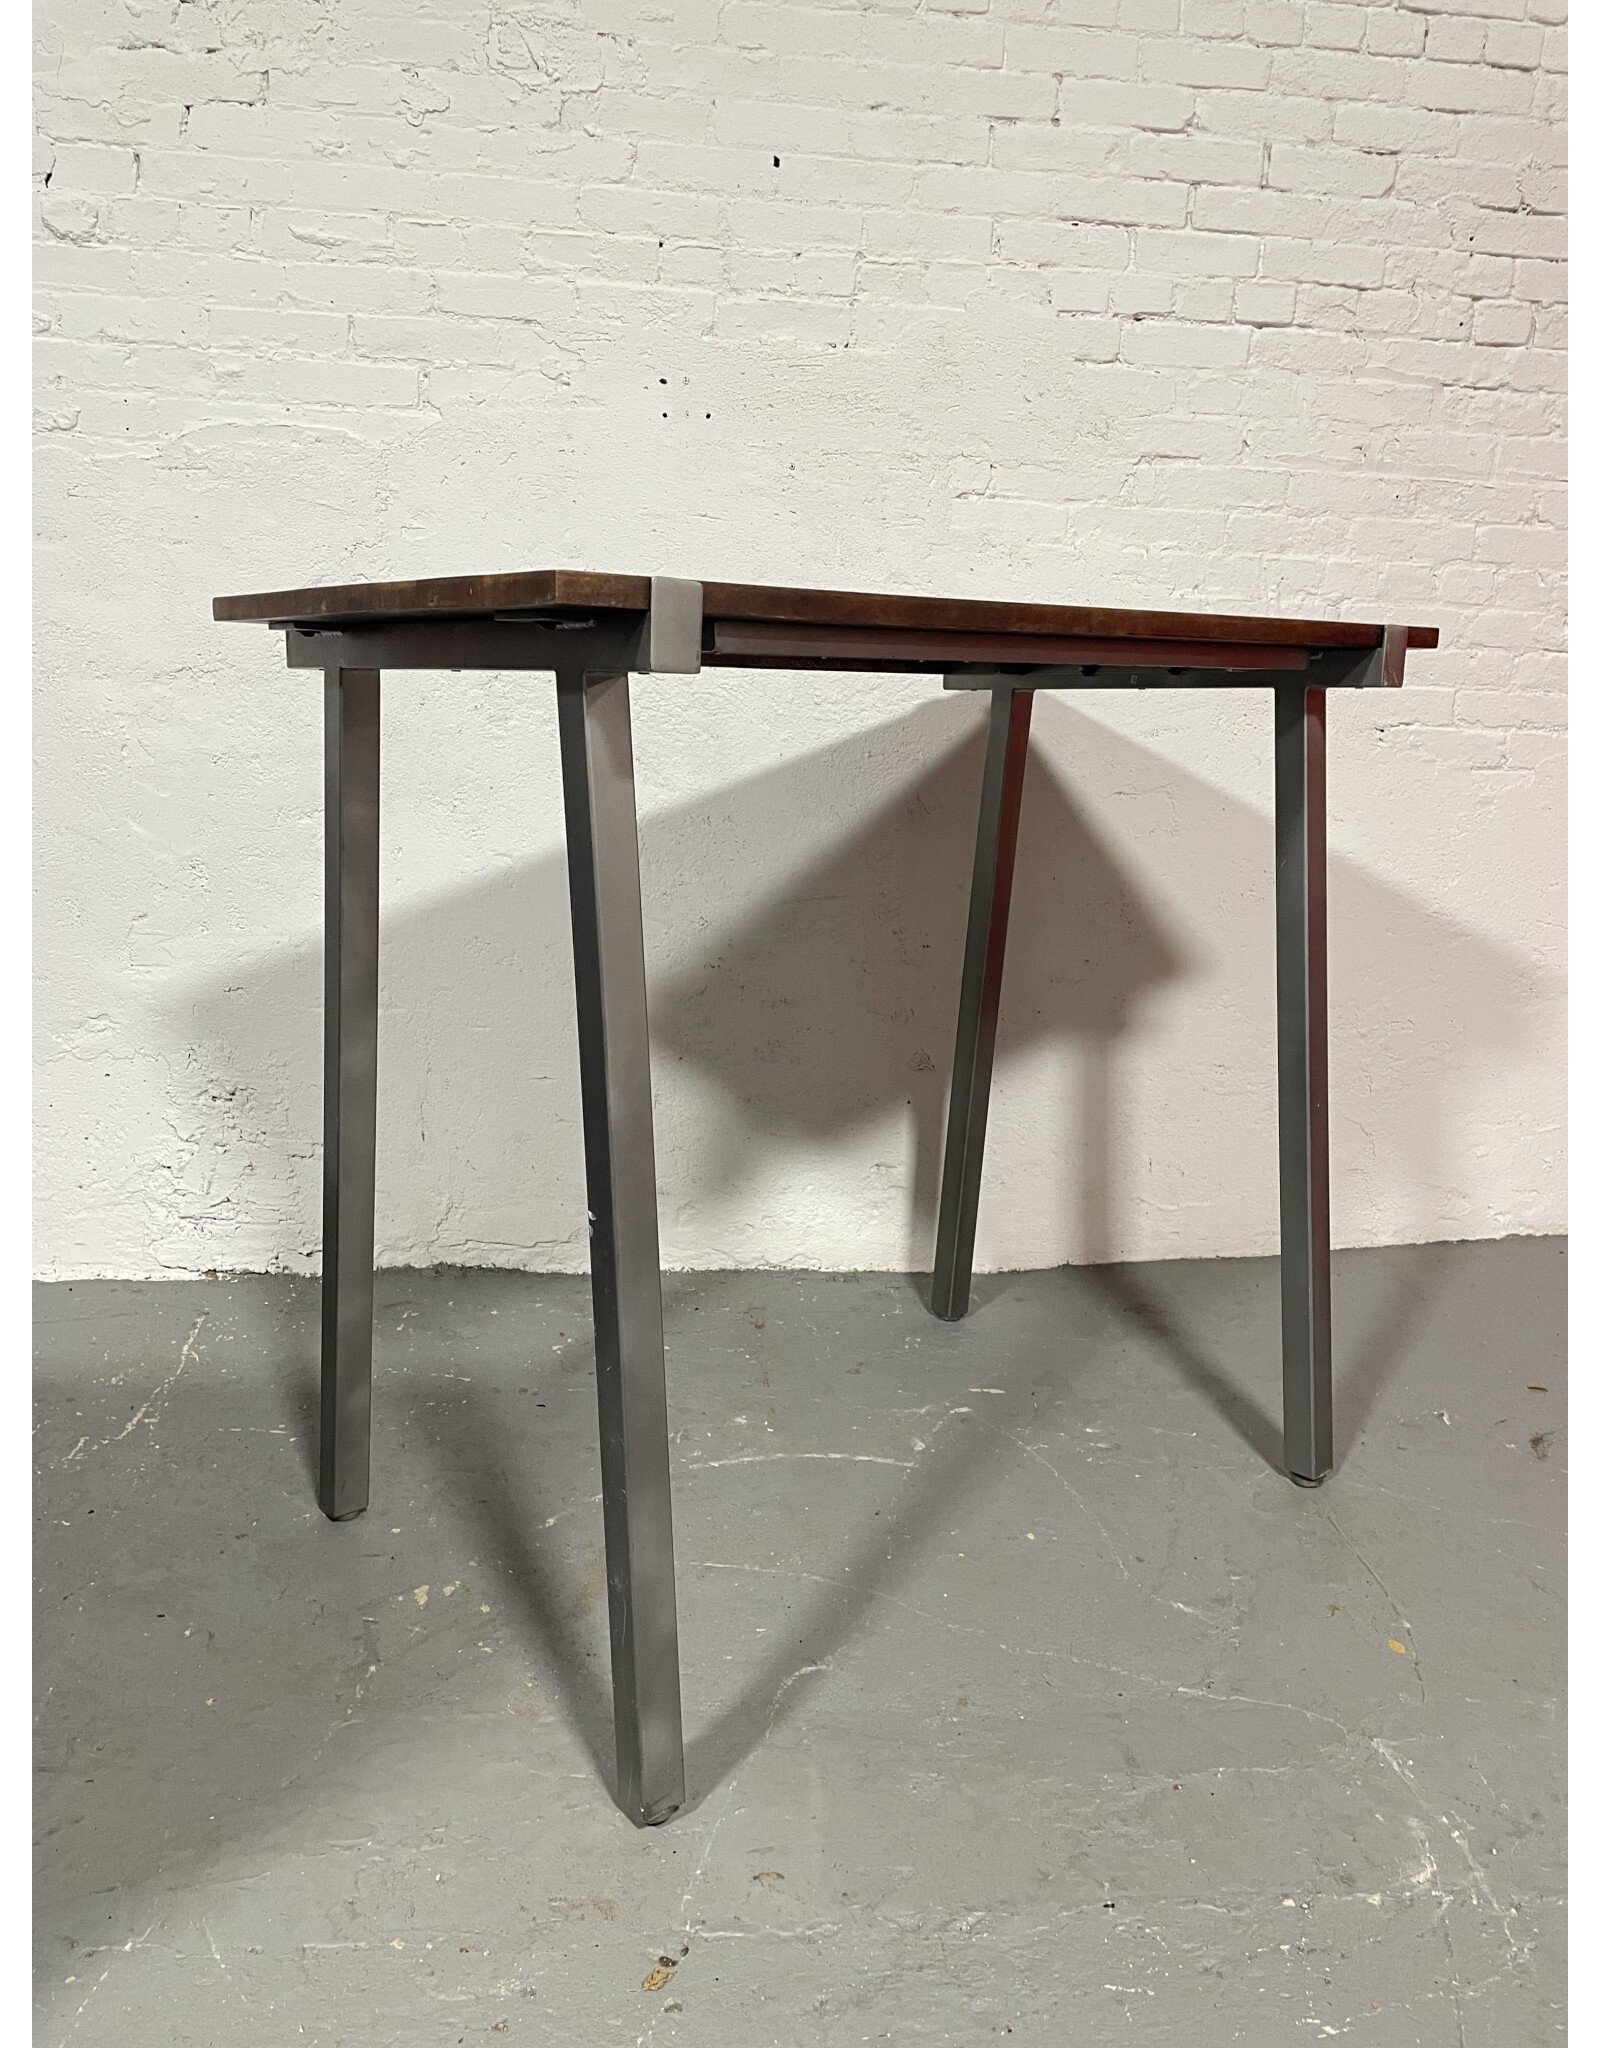 CB2 Vice High Dining Table